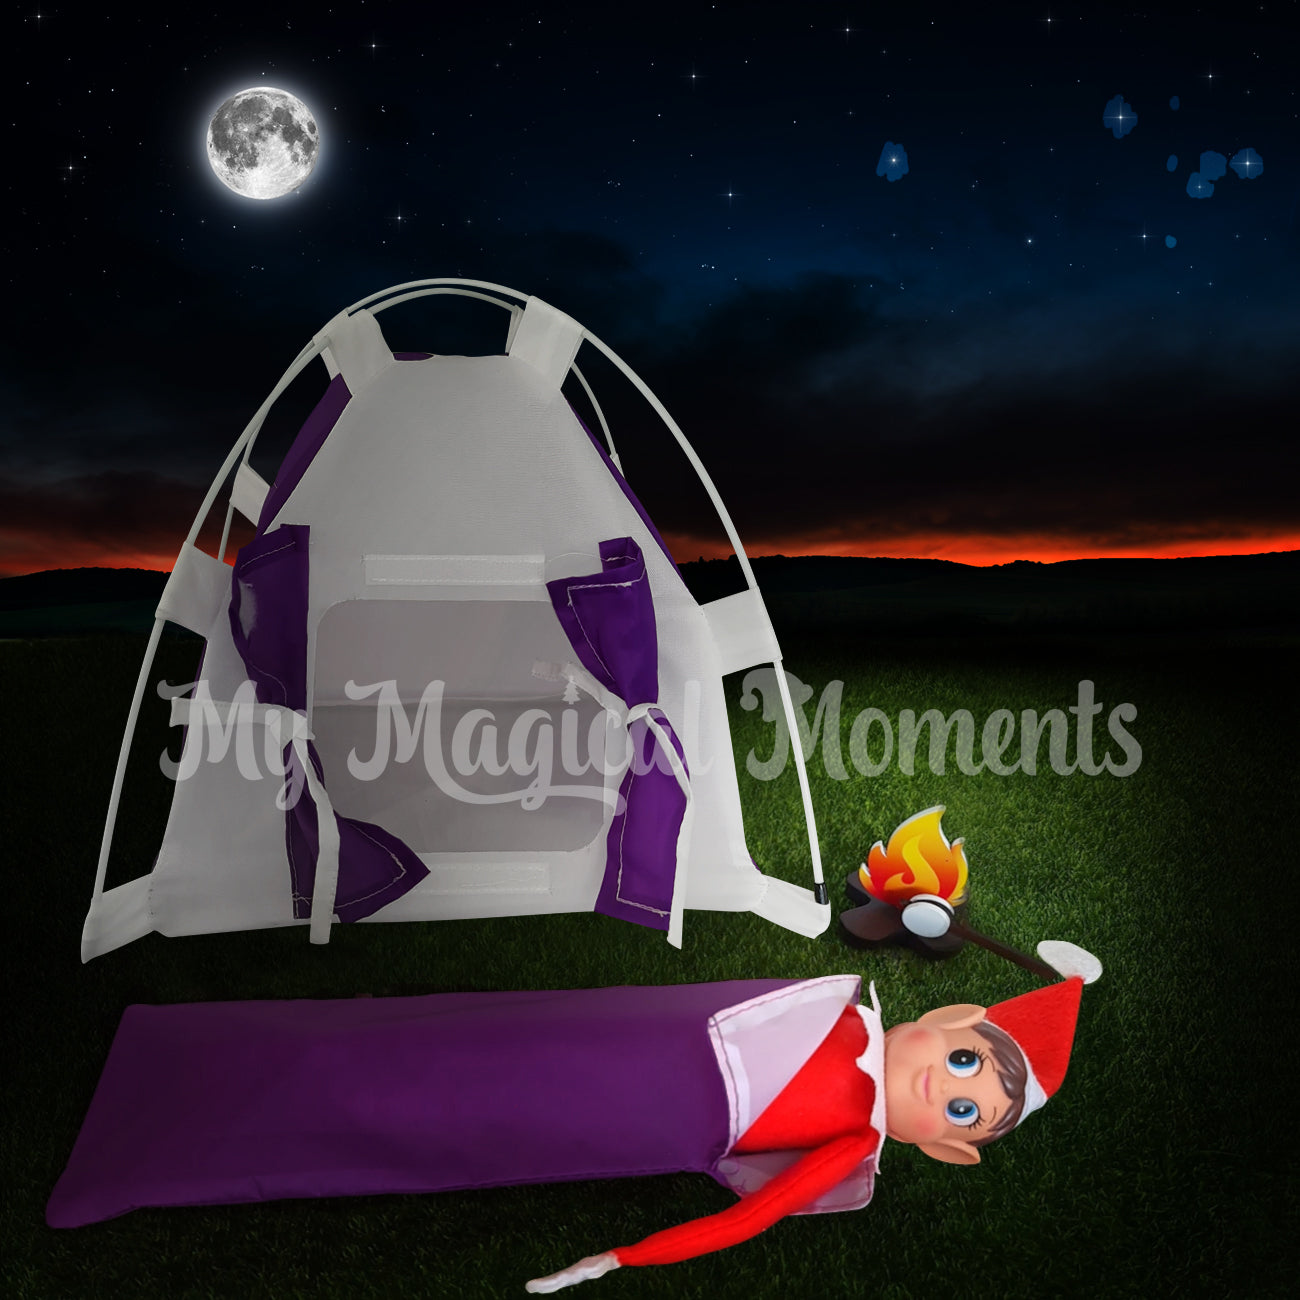 Elves Behavin Badly Camping in his miniature tent with fire pit